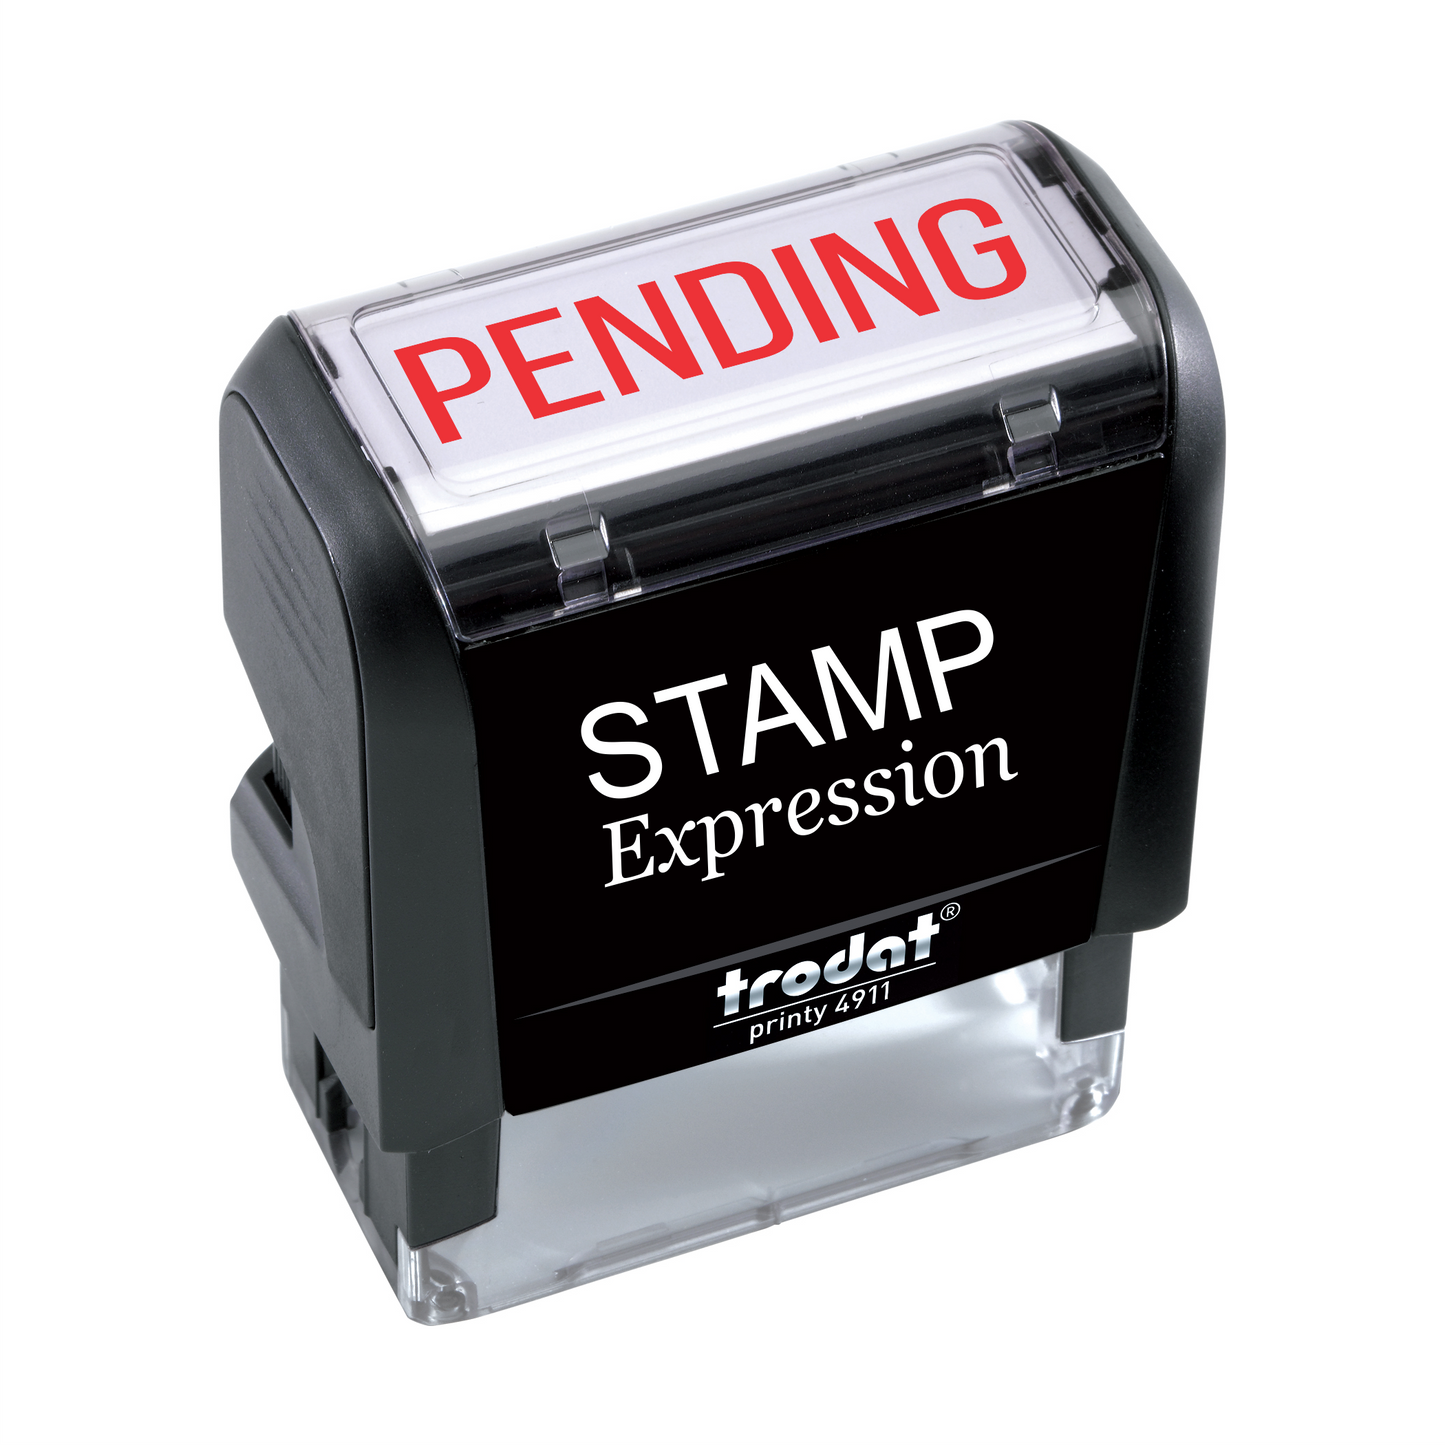 Pending Office Self Inking Rubber Stamp (SH-5340)